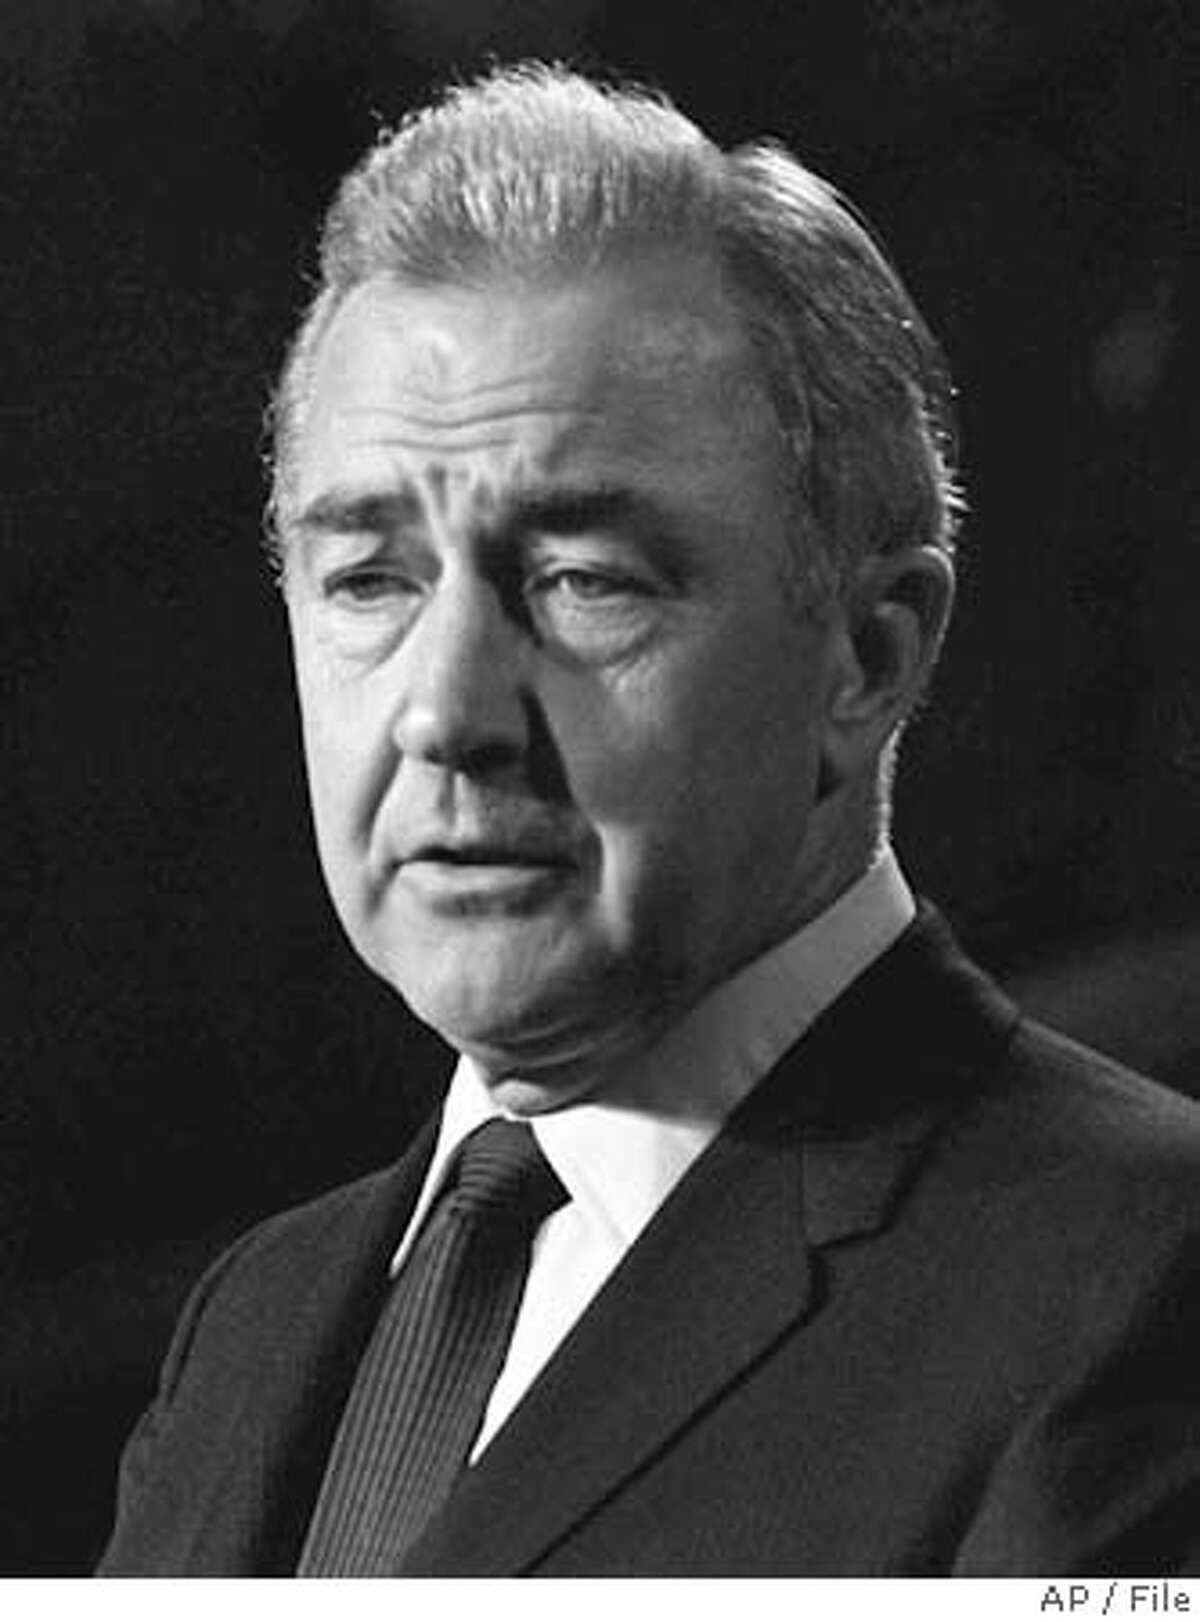 ** FILE ** Presidential candidate Sen. Eugene McCarthy, D-Minn., discusses his defeat in this Aug. 29, 1968, file photo. McCarthy, whose insurgent campaign toppled a sitting president in 1968 and forced the Democratic Party to take seriously his message against the Vietnam War, died Saturday, Dec. 10, 2005. He was 89. (AP Photo/file) Ran on: 12-11-2005 Eugene McCarthy challenged an incumbent president on an unpopular foreign war.